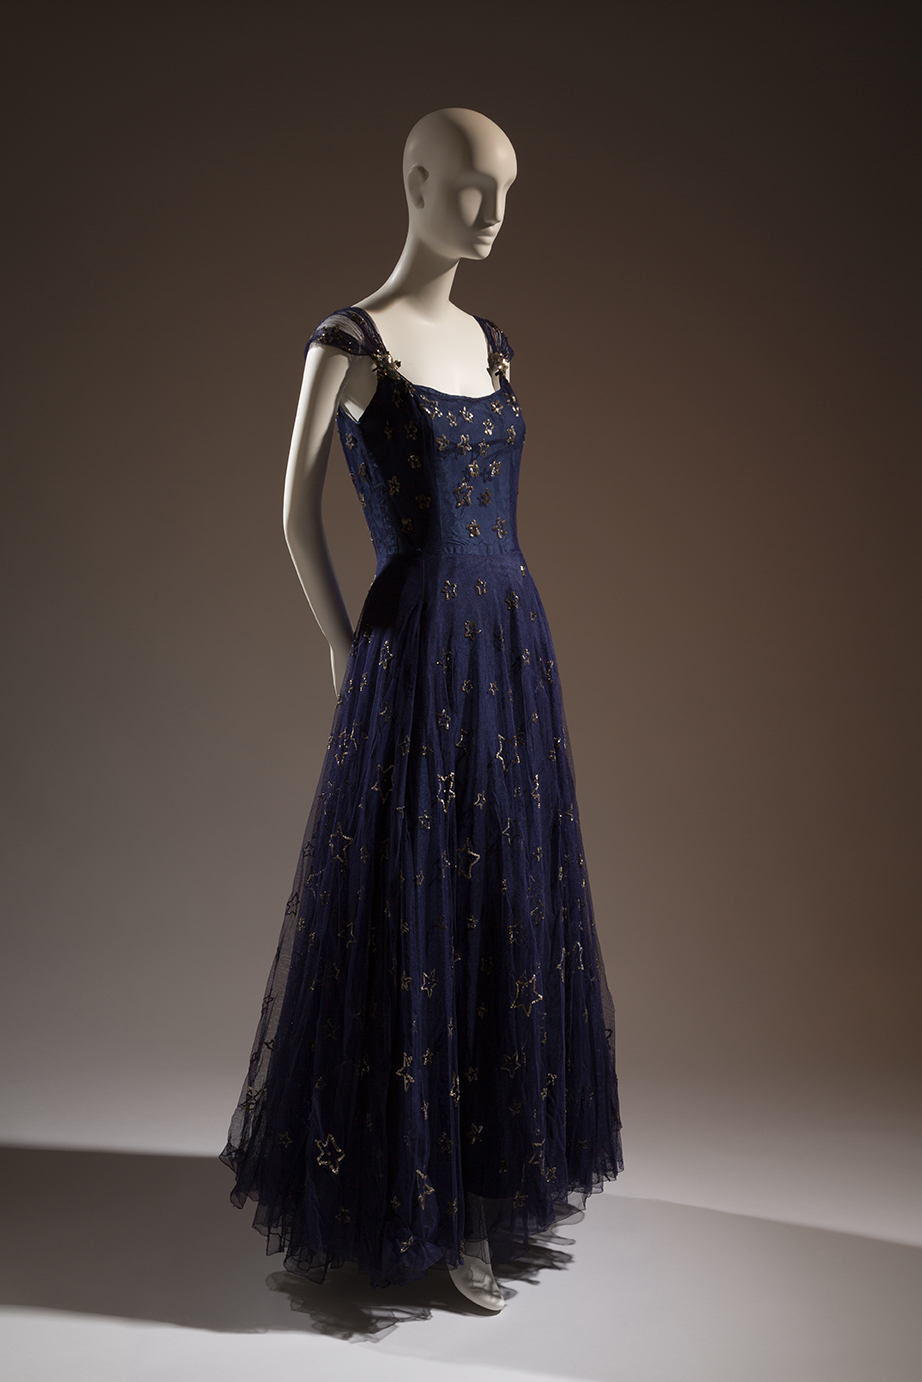 Gabrielle Coco Chanel, Etoiles navy blue tulle and sequin evening dress  1937. Lent by Beverley Birks. ©The Museum of FIT – A Shaded View on Fashion